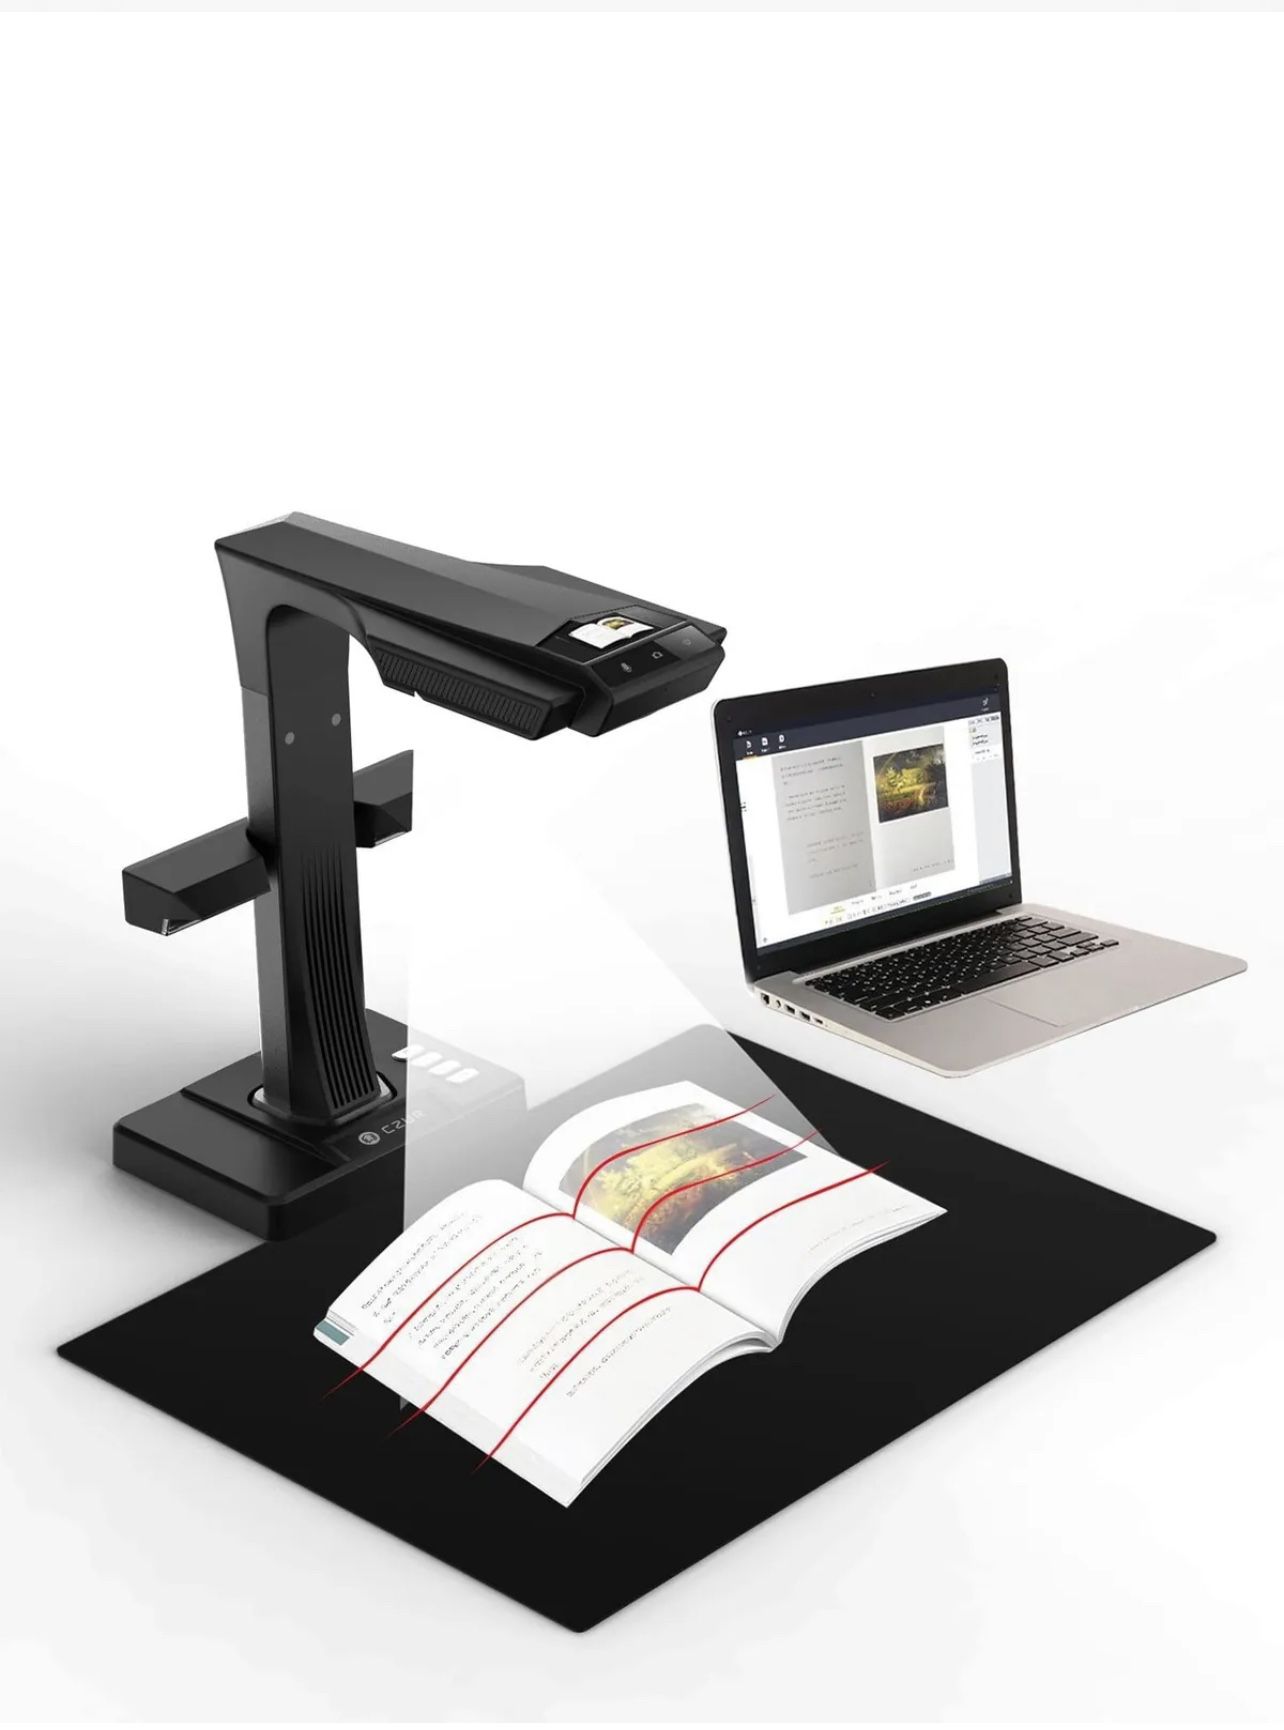 CZUR ET16 Plus Book & Document Scanner with Smart OCR for Mac and Windows